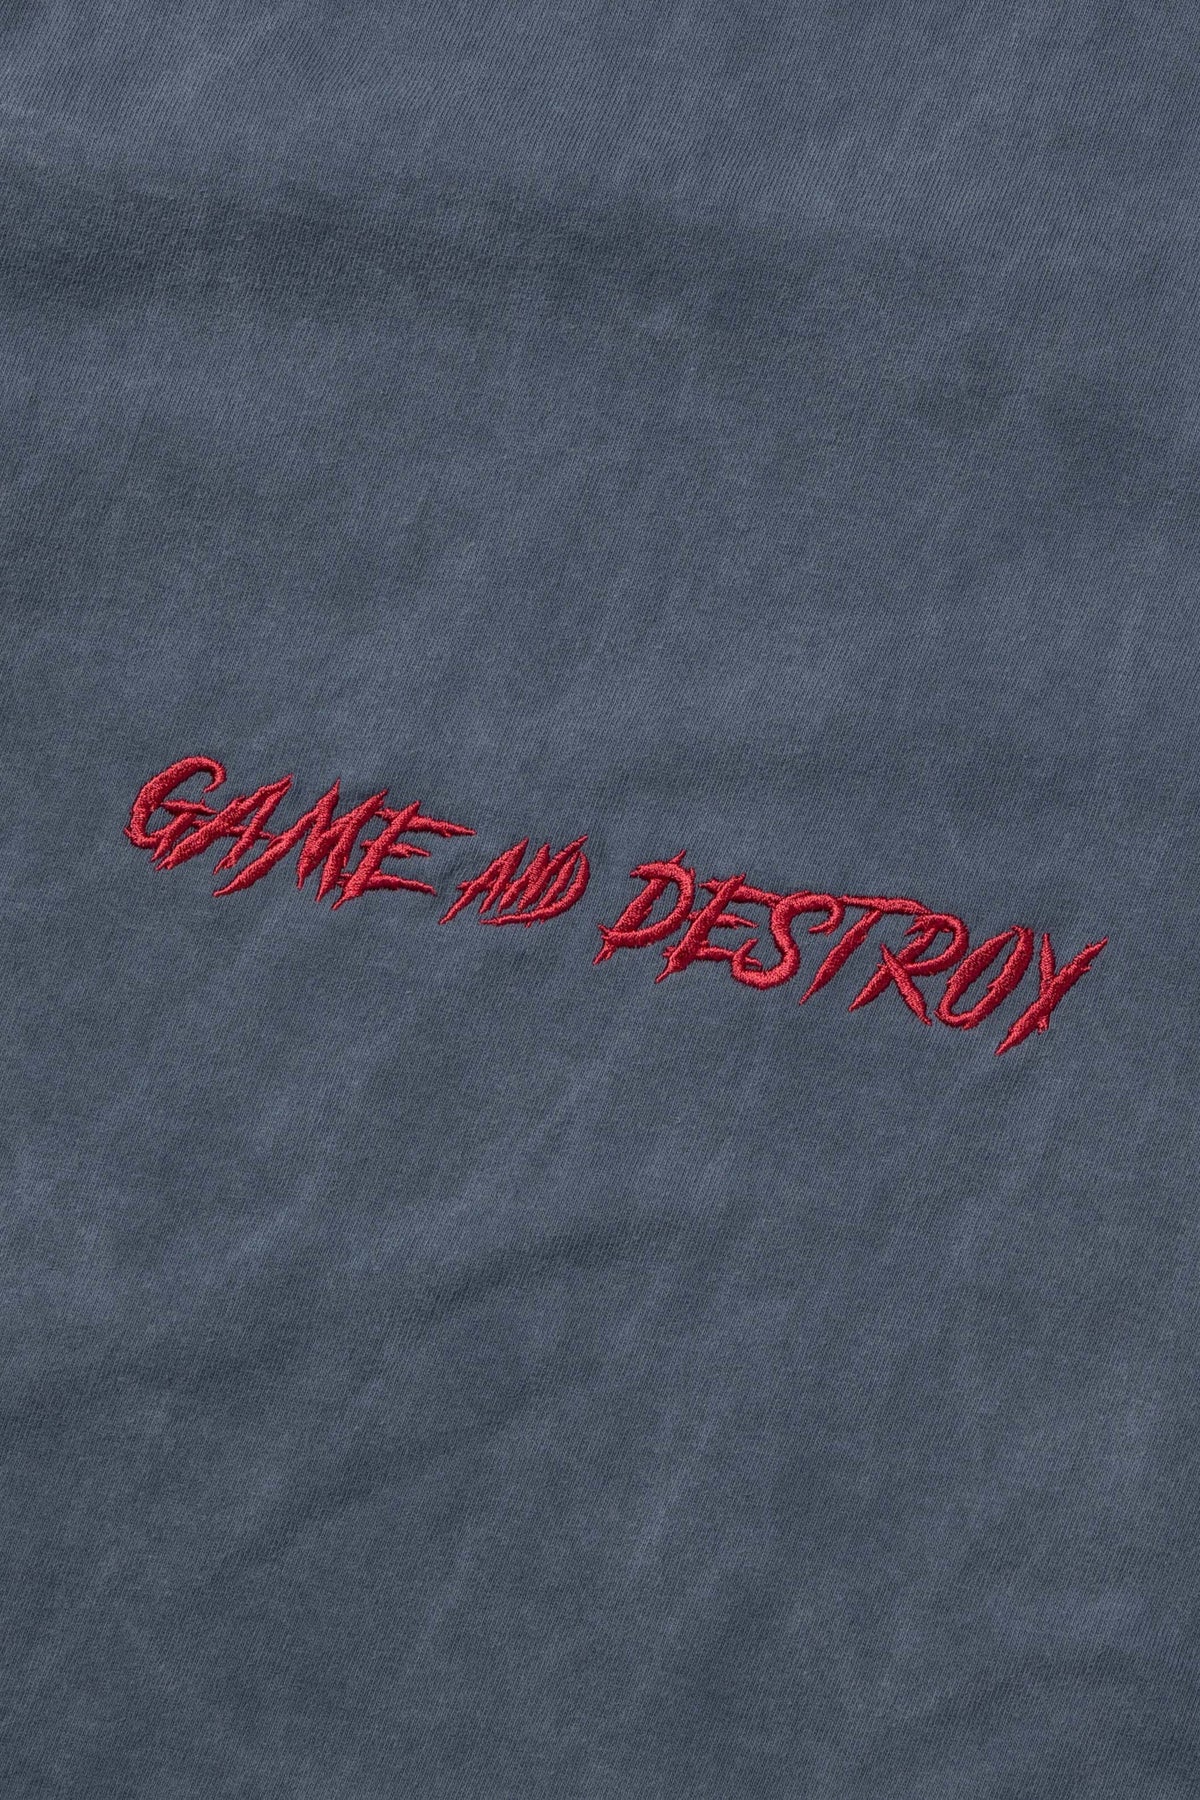 GAME AND DESTROY TEE / BLUE GRAY